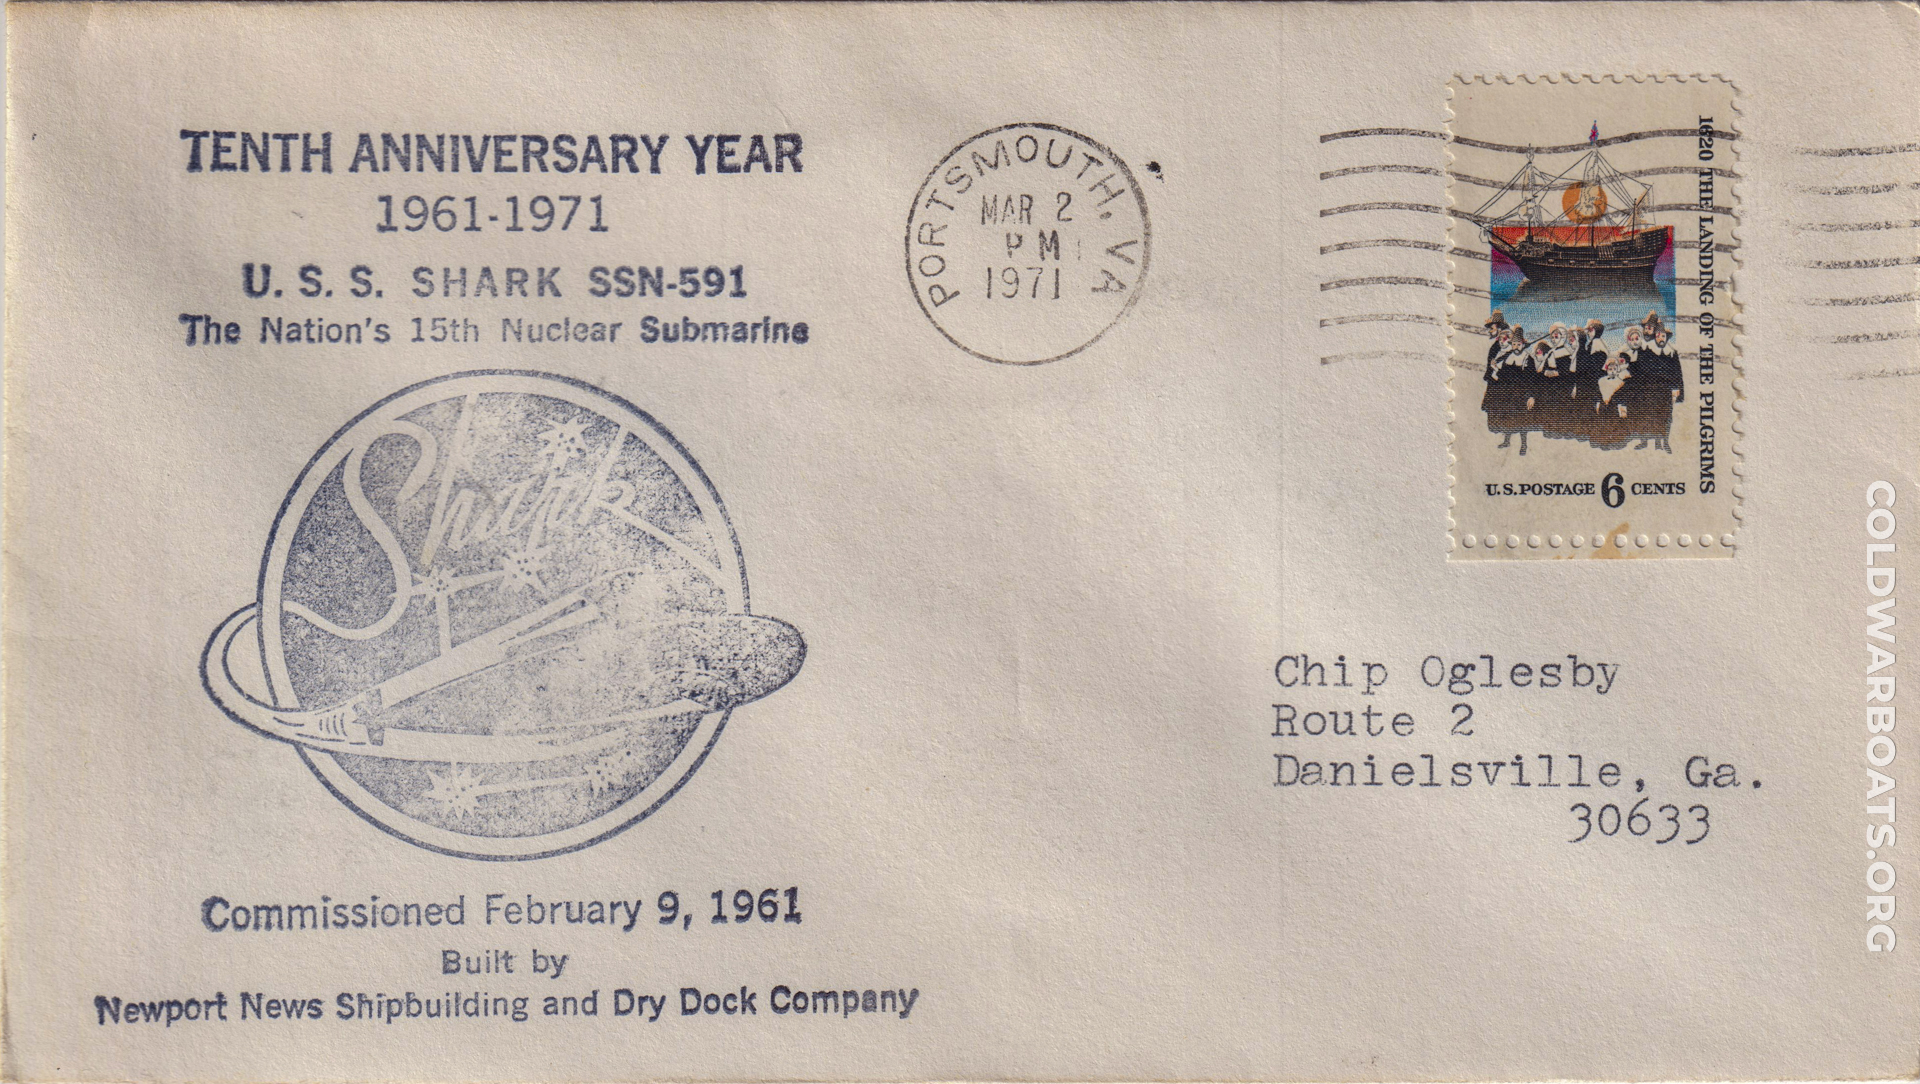 Cover commemorating the 10th anniversary of the commissioning of the USS SHARK (SSN 591) on 09 FEB 1971.